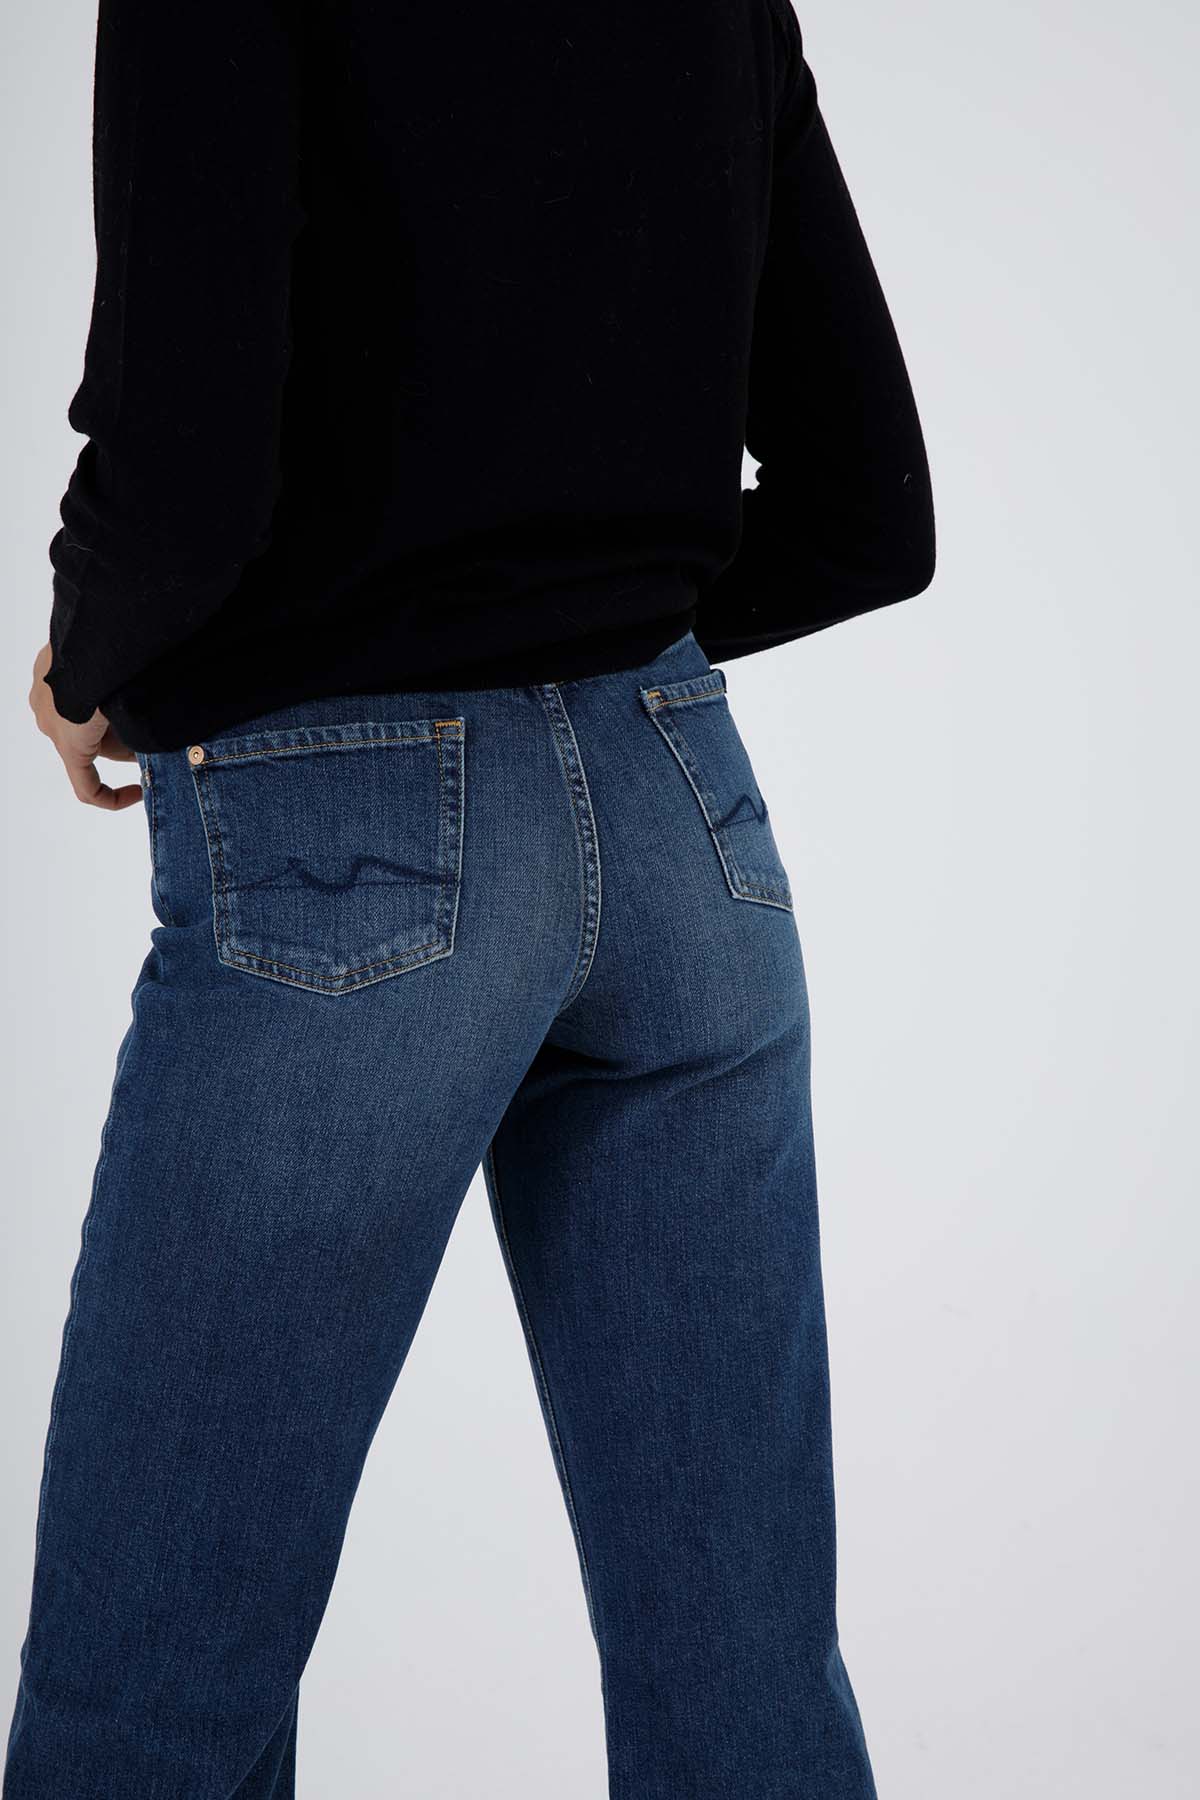 7 For All Mankind Alexa Cropped Streç Jeans-Libas Trendy Fashion Store